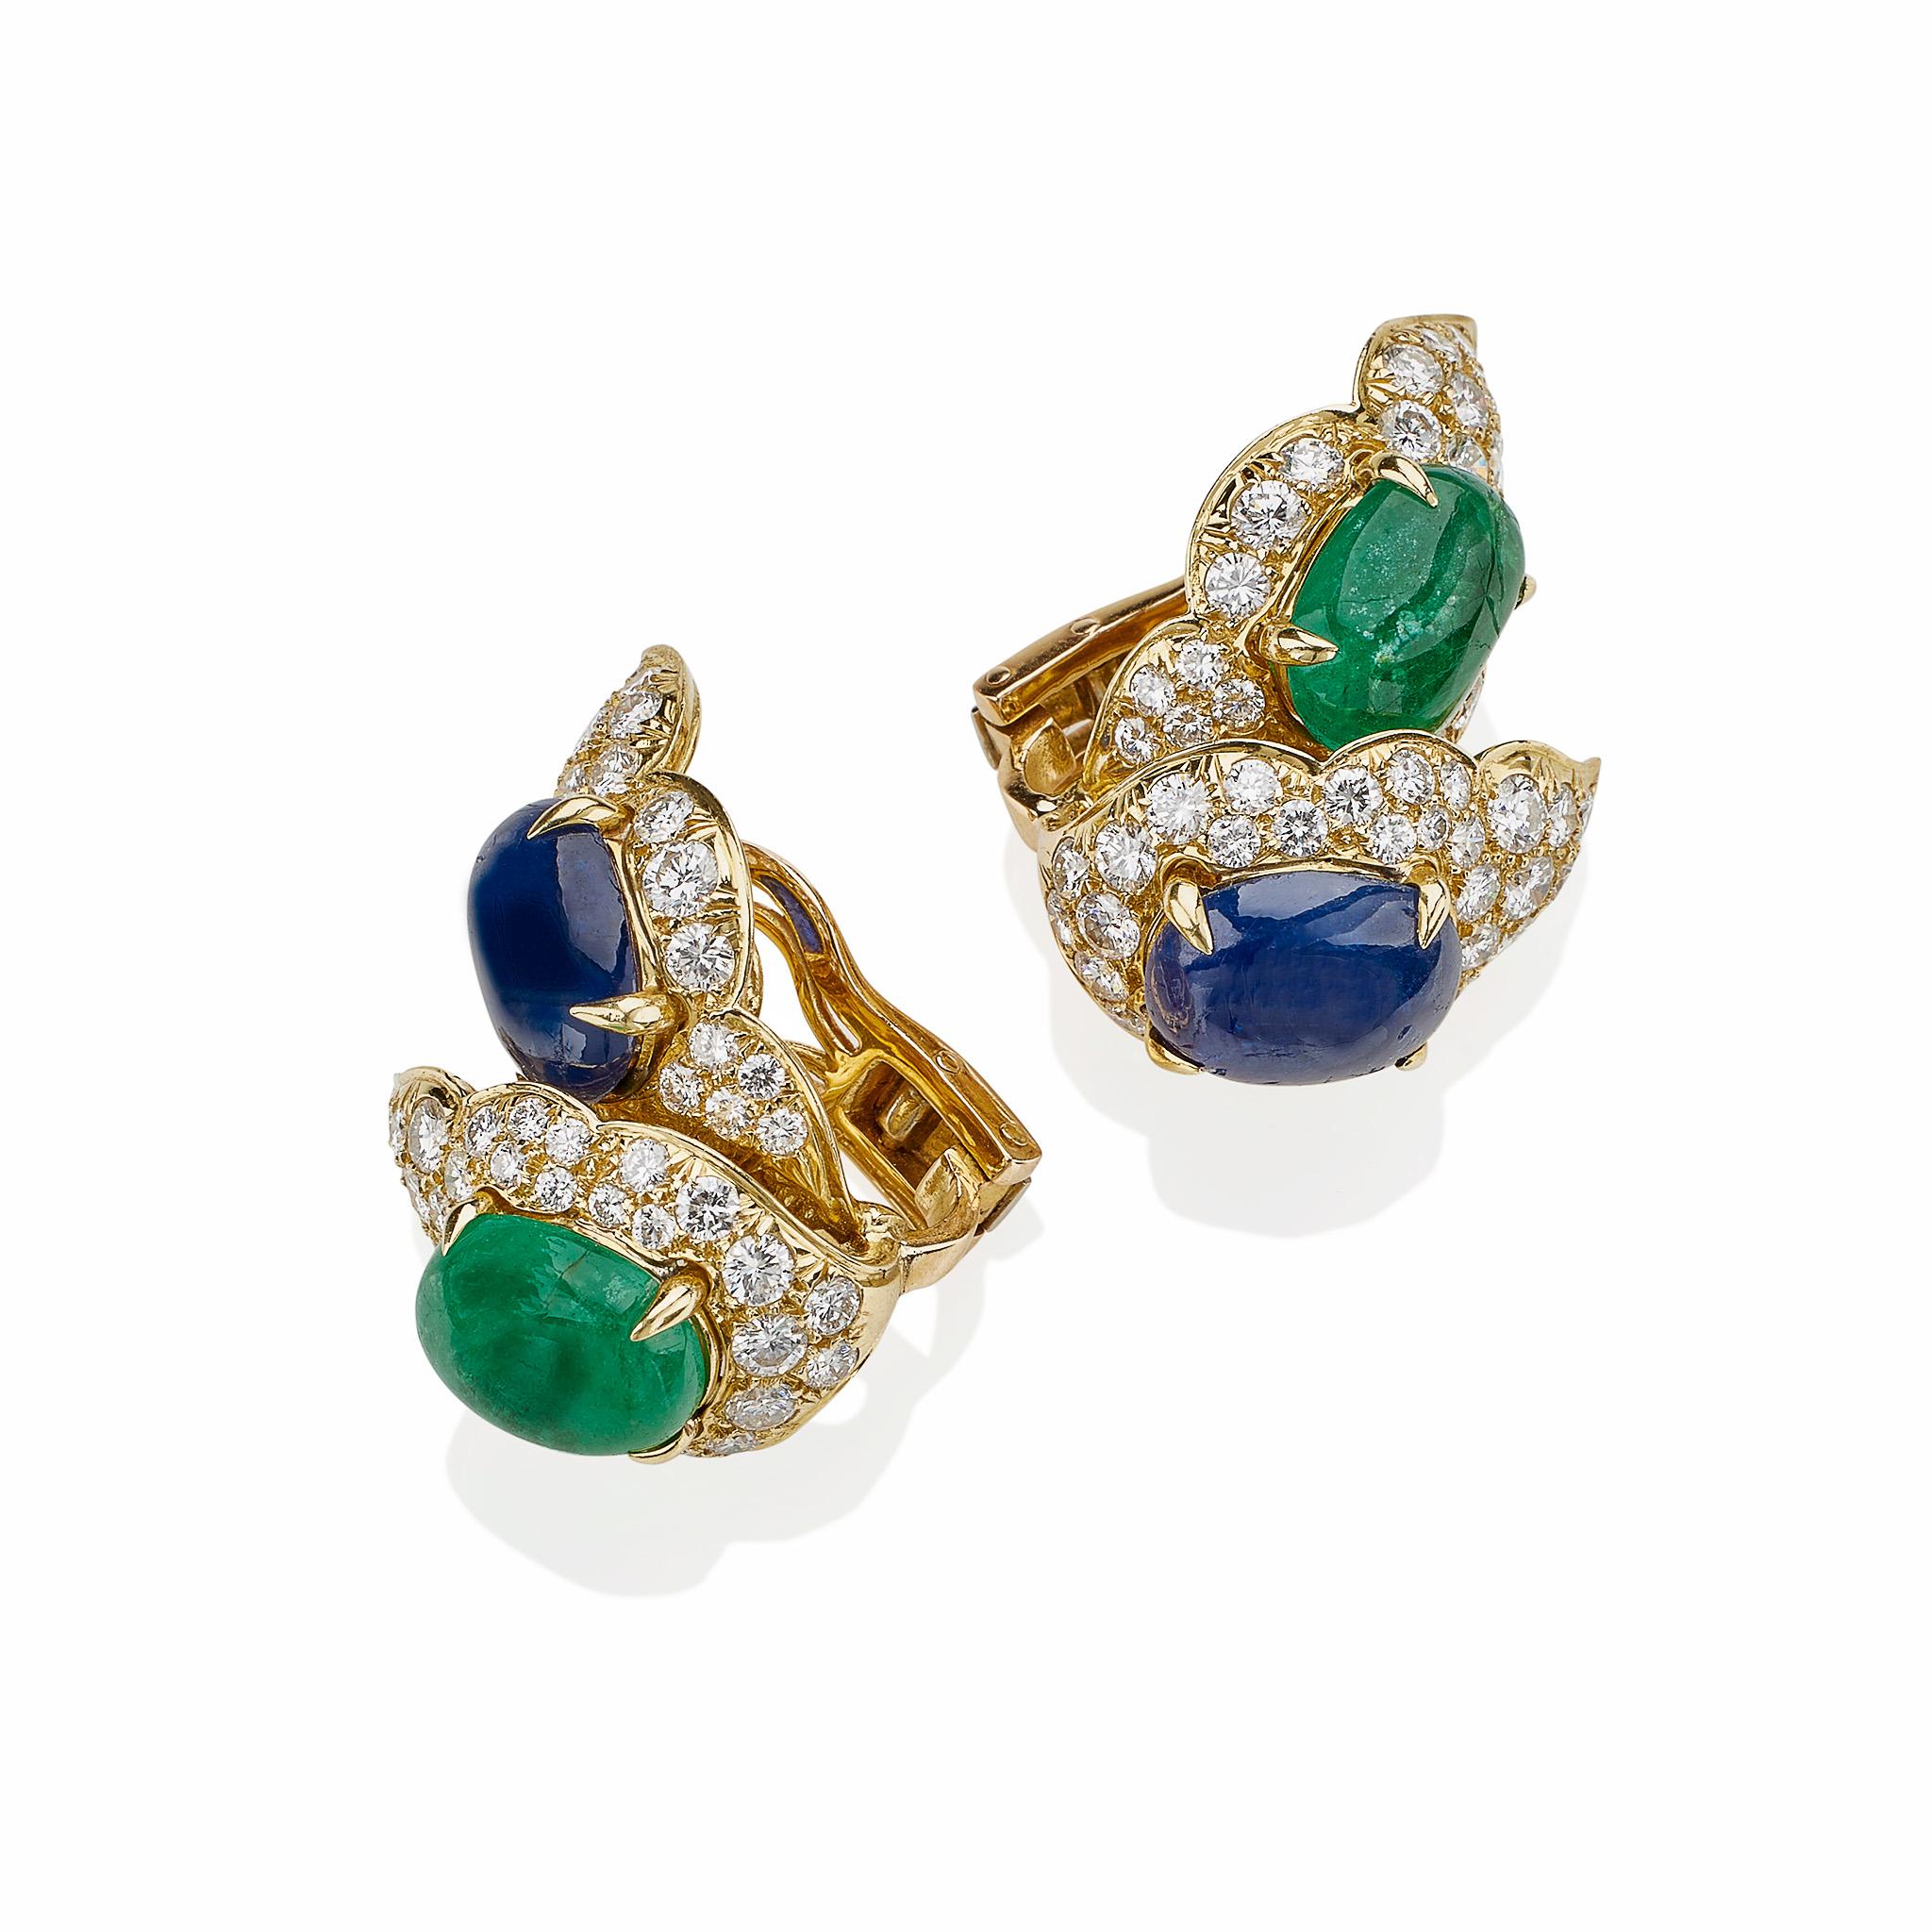 These 18K gold, emerald, sapphire and diamond clip earrings by Bulgari date from the 1980s. Designed as a double leaf forms, each leaf centers an oval cabochon emerald or sapphire framed by pavé-set round brilliant-cut diamonds, mounted in 18K gold.